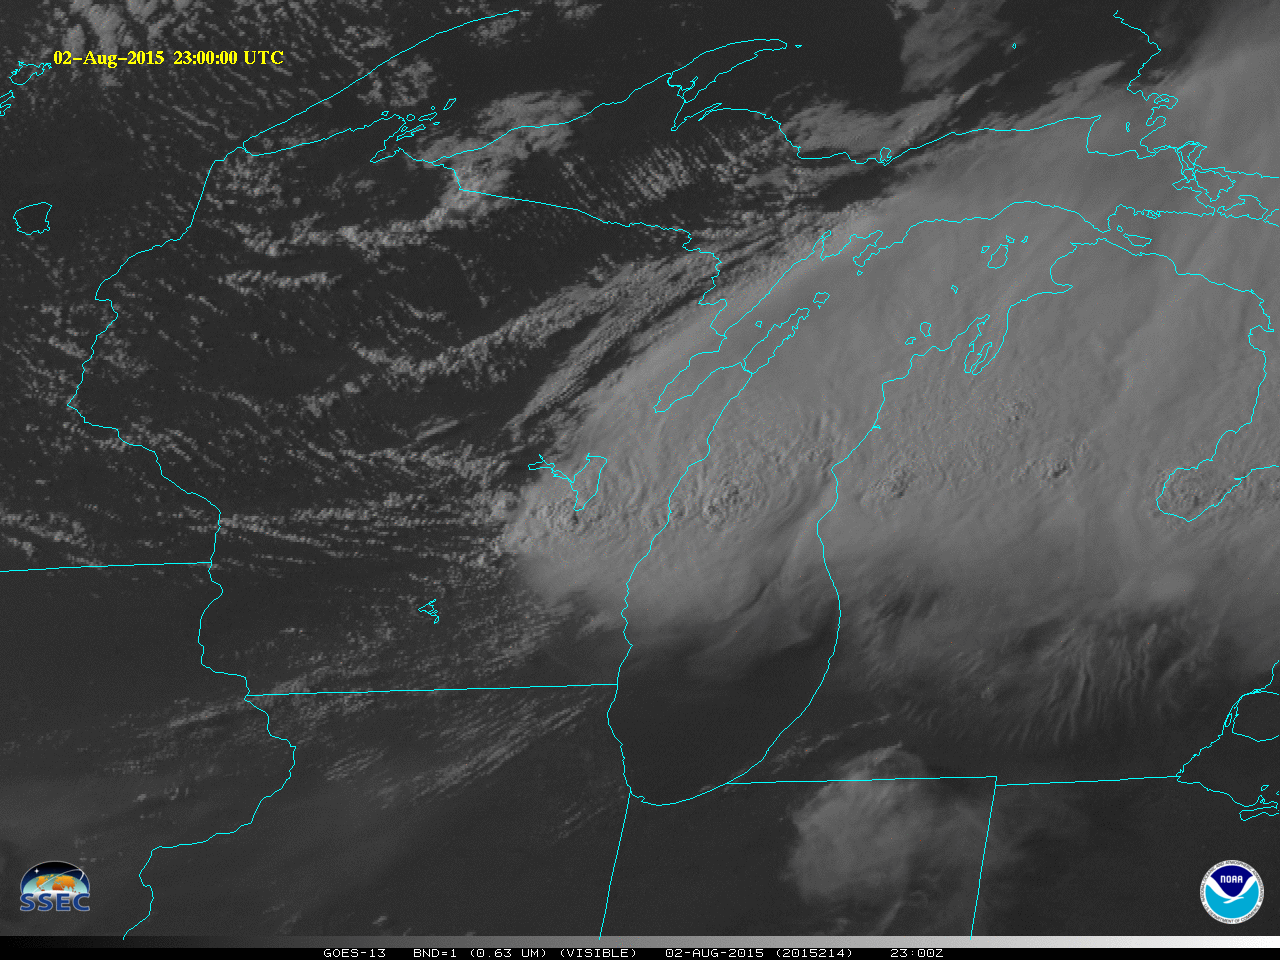 GOES-13 Visible (0.63µm) imagery [click to play animation]